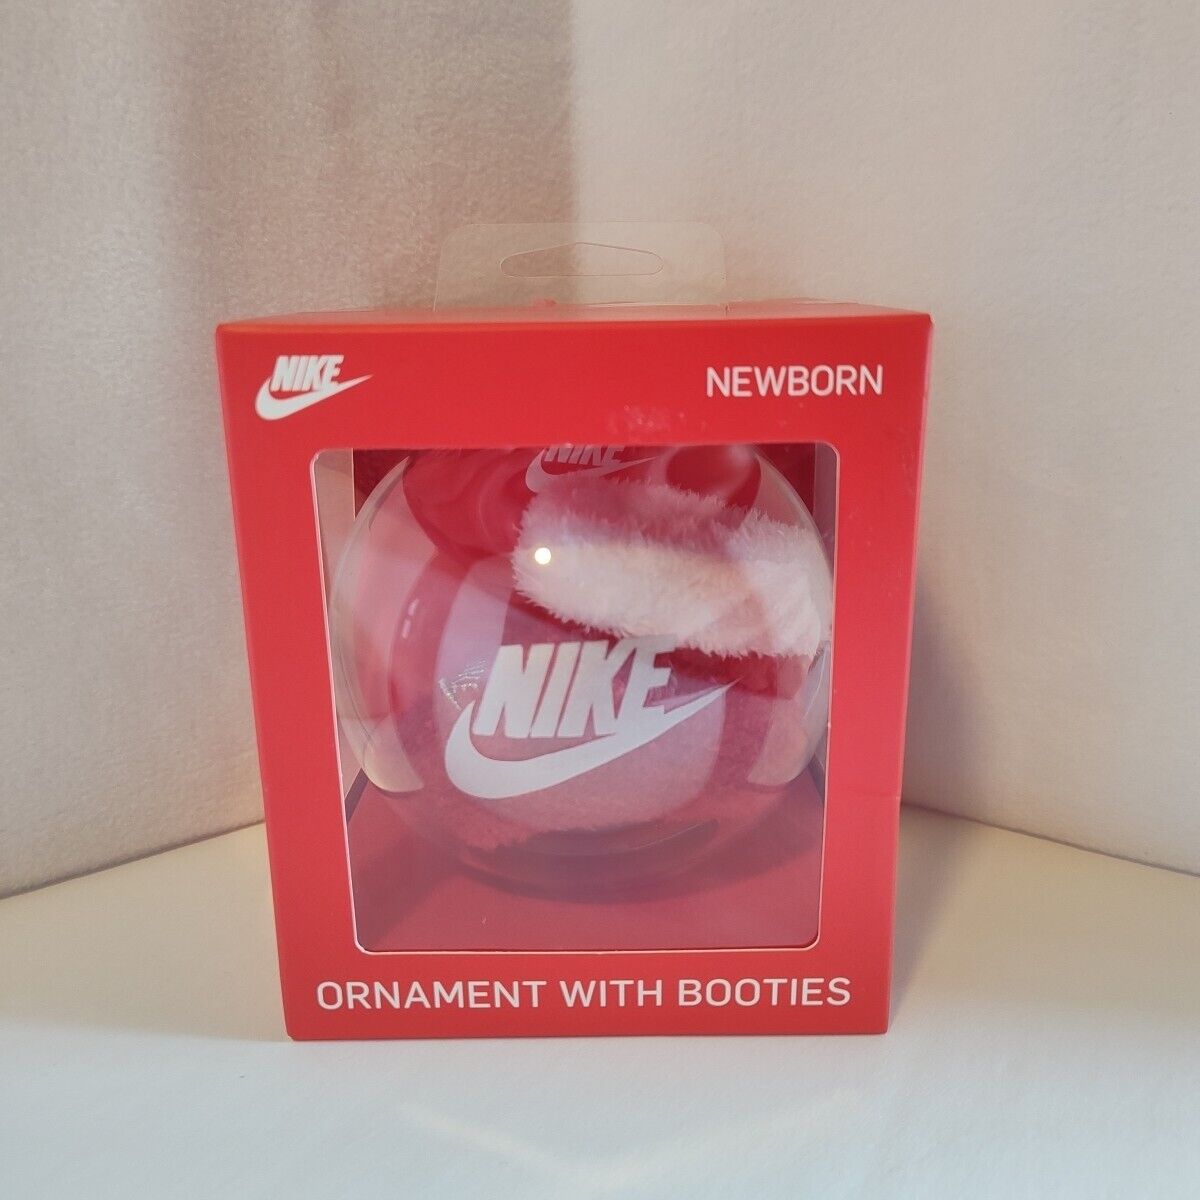 NIKE Ornament w/ 0-6m Booties - Red - New